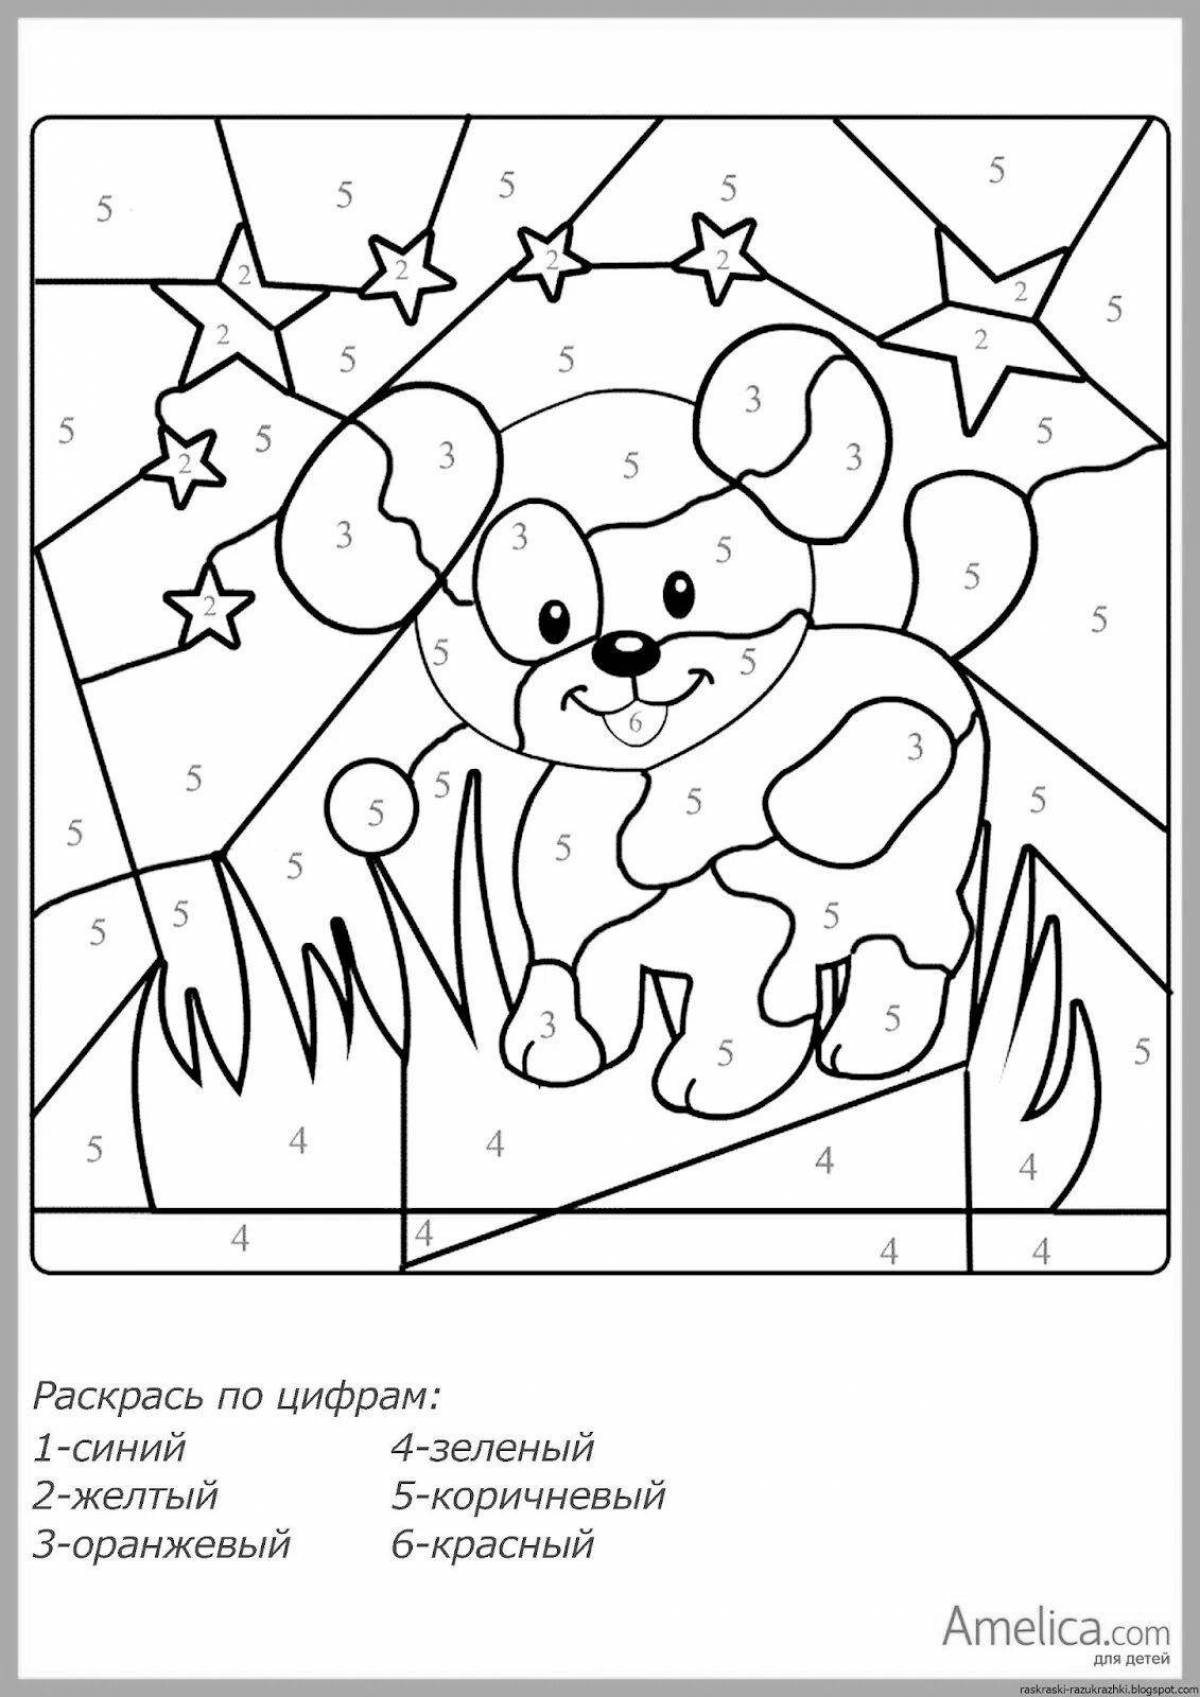 Color-frenzy coloring page by numbers senior group